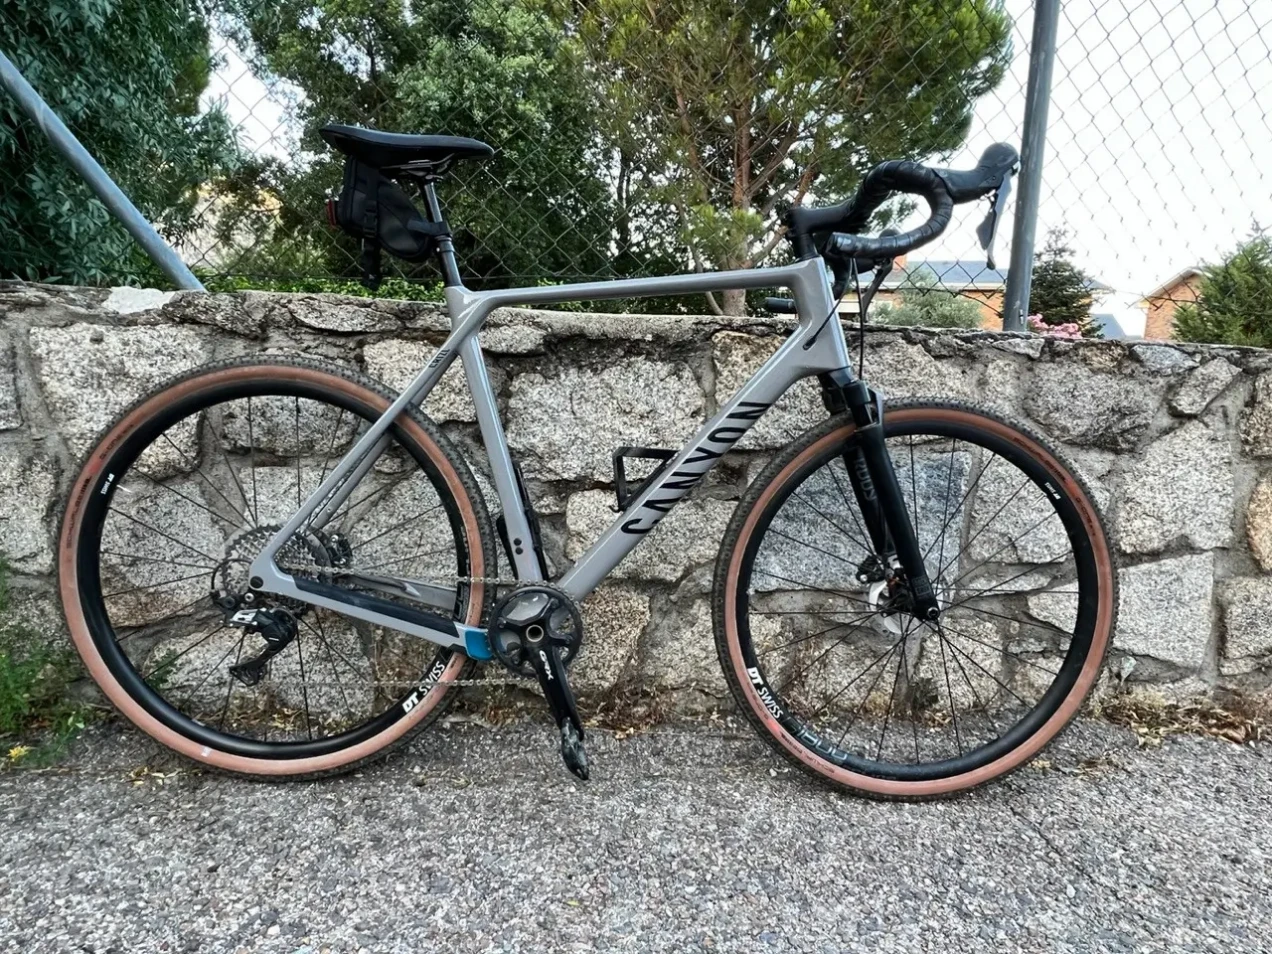 Canyon Grizl CF SL 8 Suspension used in xl | buycycle